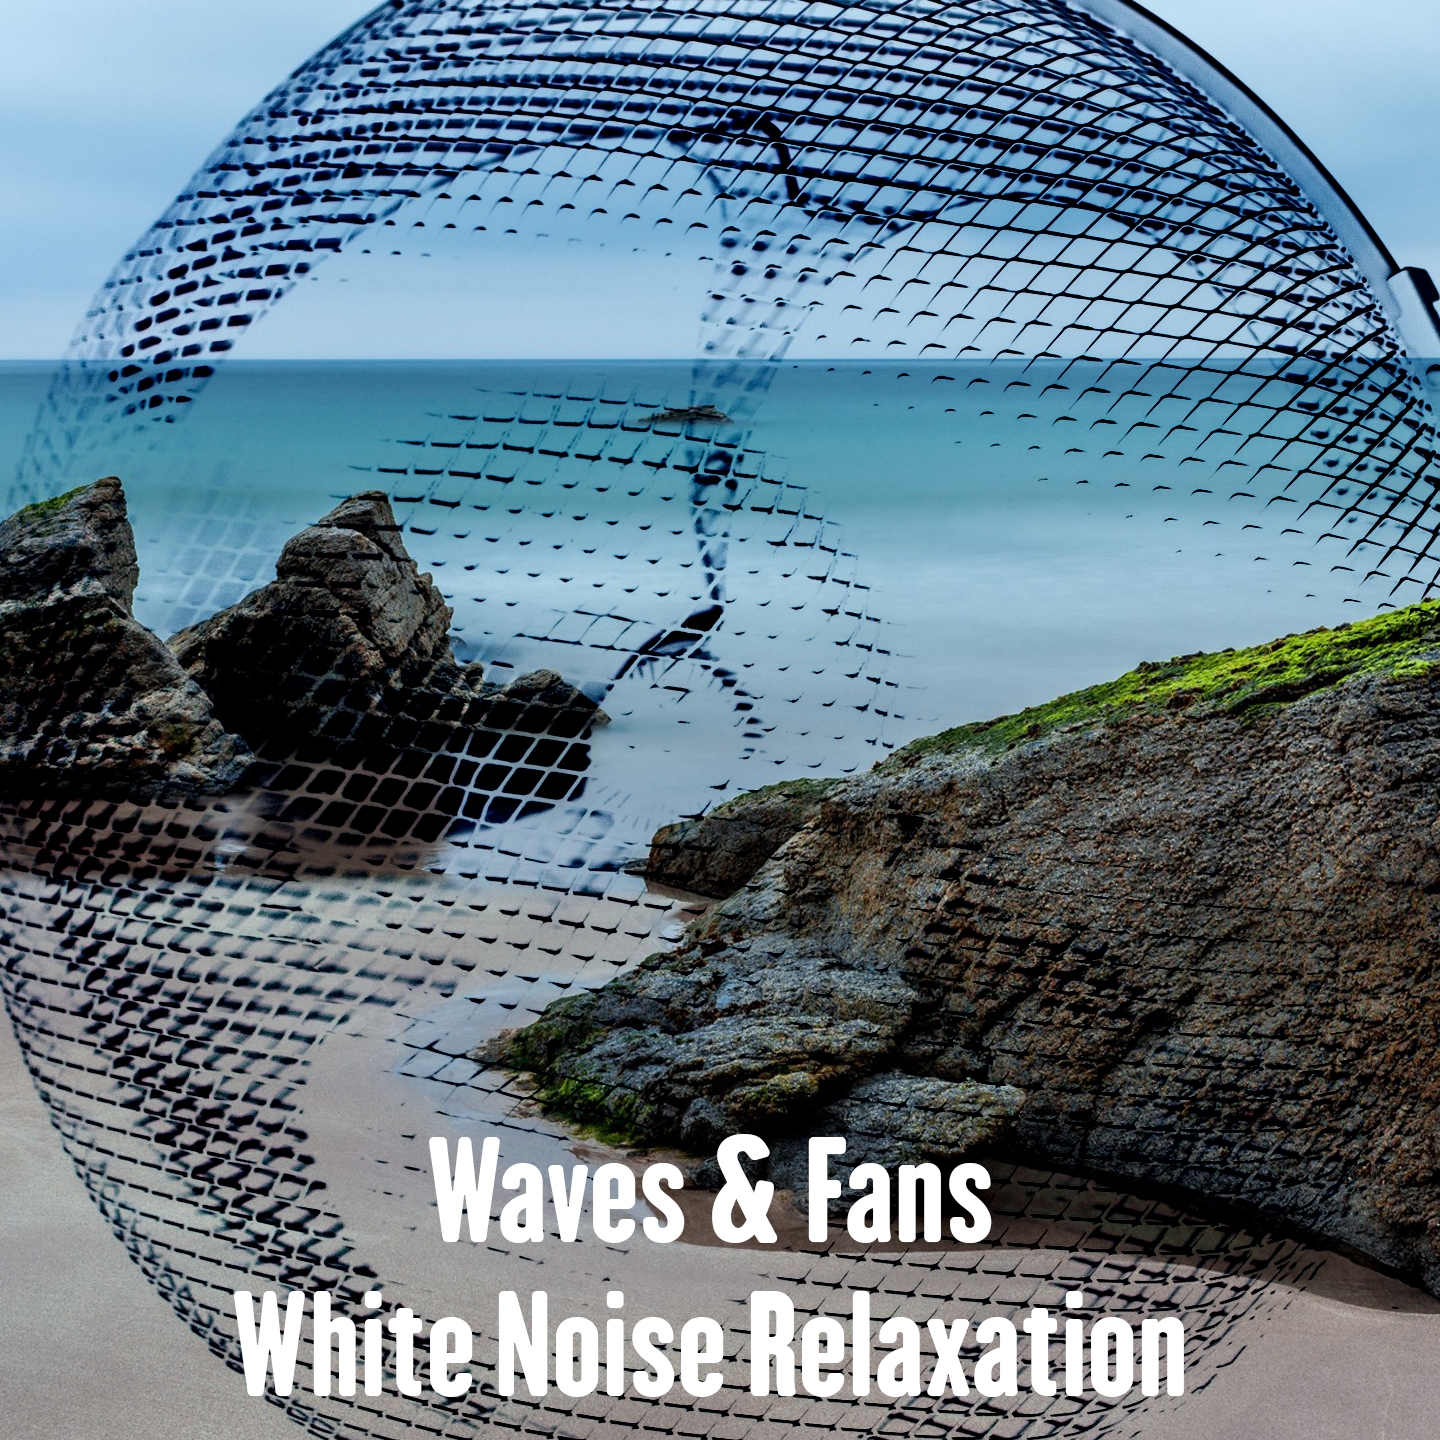 Waves & Fans White Noise Relaxation